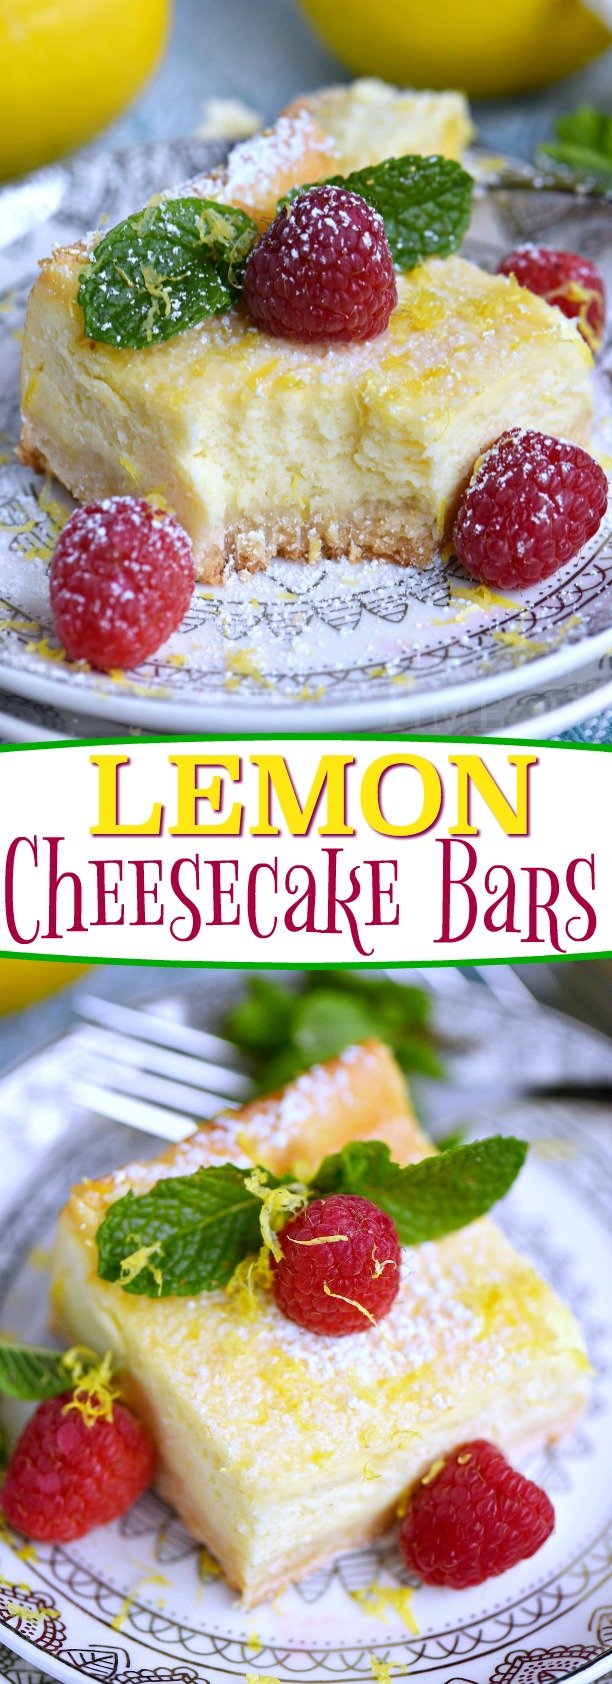 My Aunt Pam's Lemon Cheesecake Bars are made with lots of fresh lemon juice and zest so they're bursting with lemon flavor! Extra creamy, super easy and always a crowd pleaser! Top with powdered sugar, fresh raspberries, and extra lemon zest for a pretty presentation! // Mom On Timeout